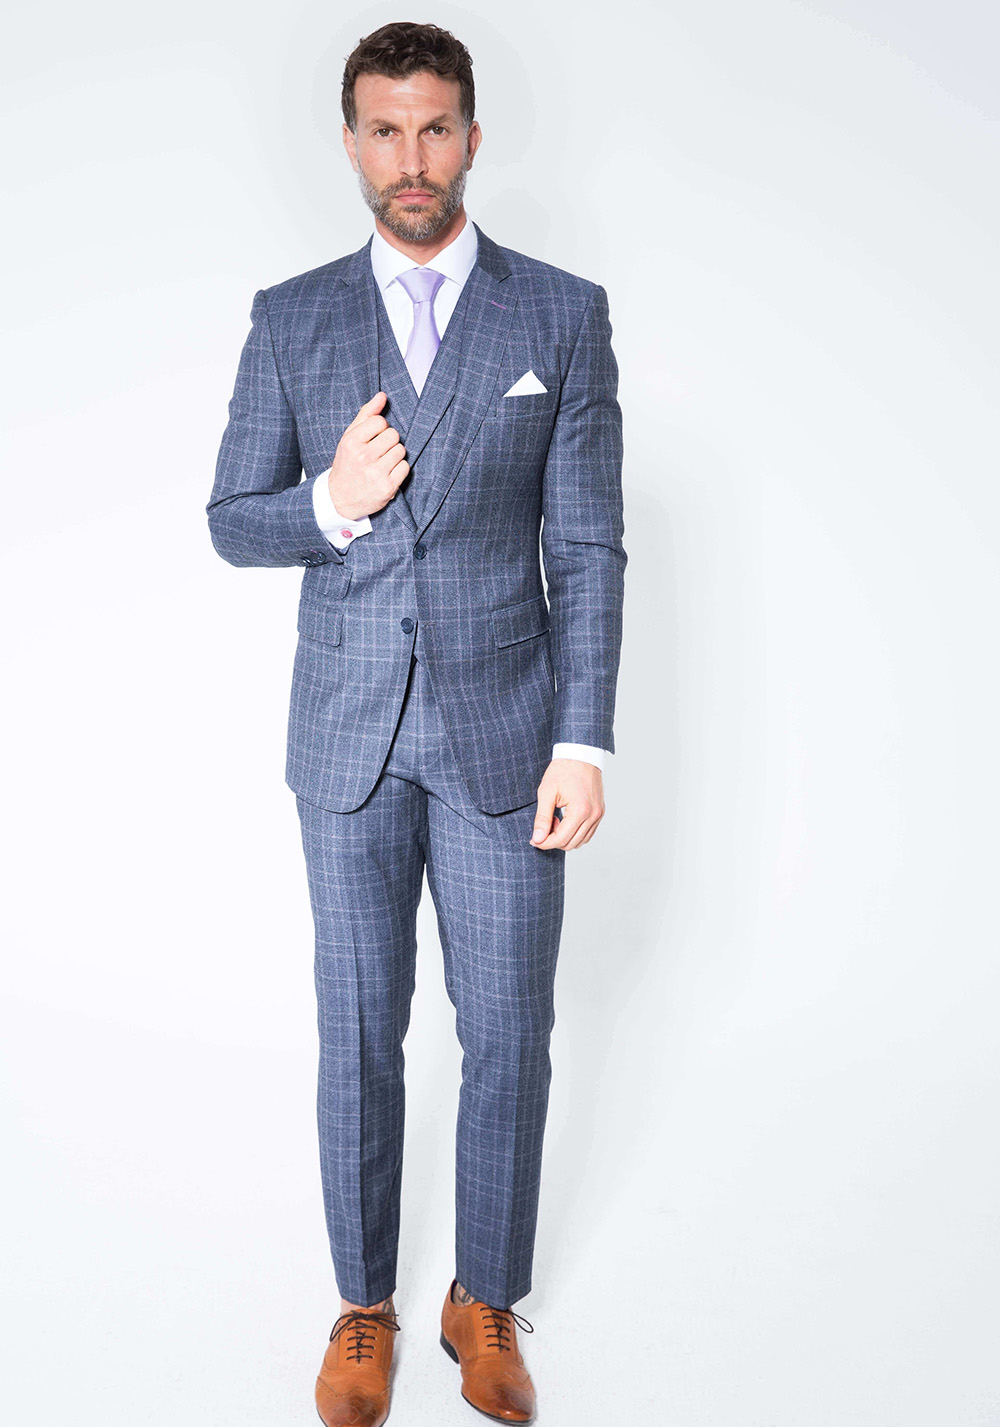 Carve Fashion with made to measure suits & bespoke suit online